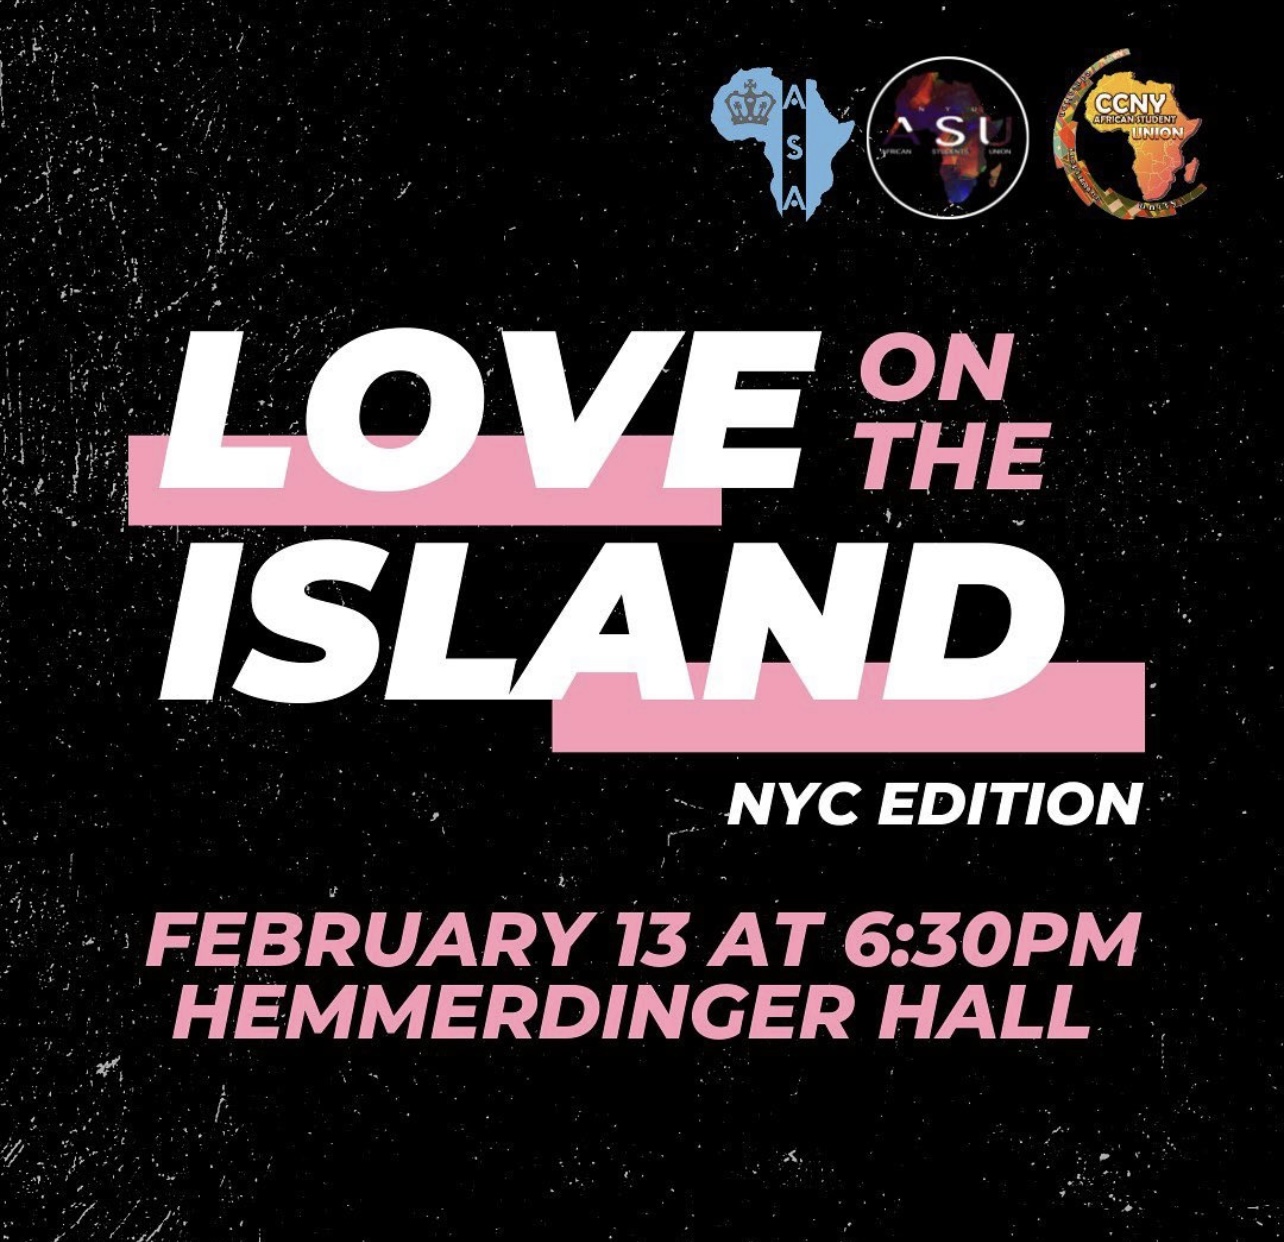 A marketing poster for ASU’s Love on the Island event.